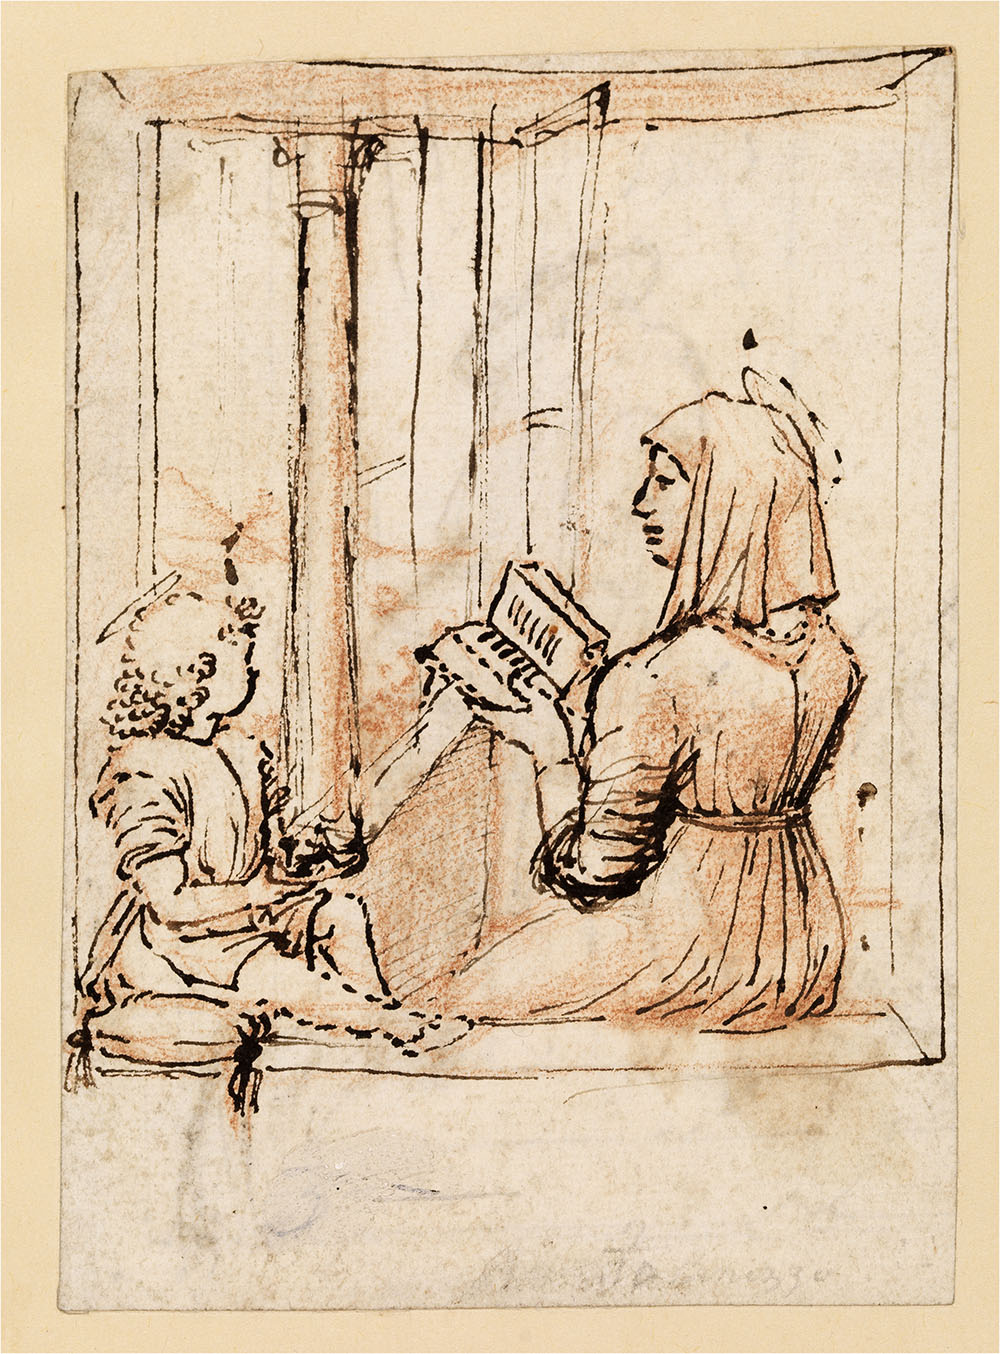 Virgin Mary reading to the Infant Christ _recto_, late 1480s - early 1490s _pen & ink over chalk on paper